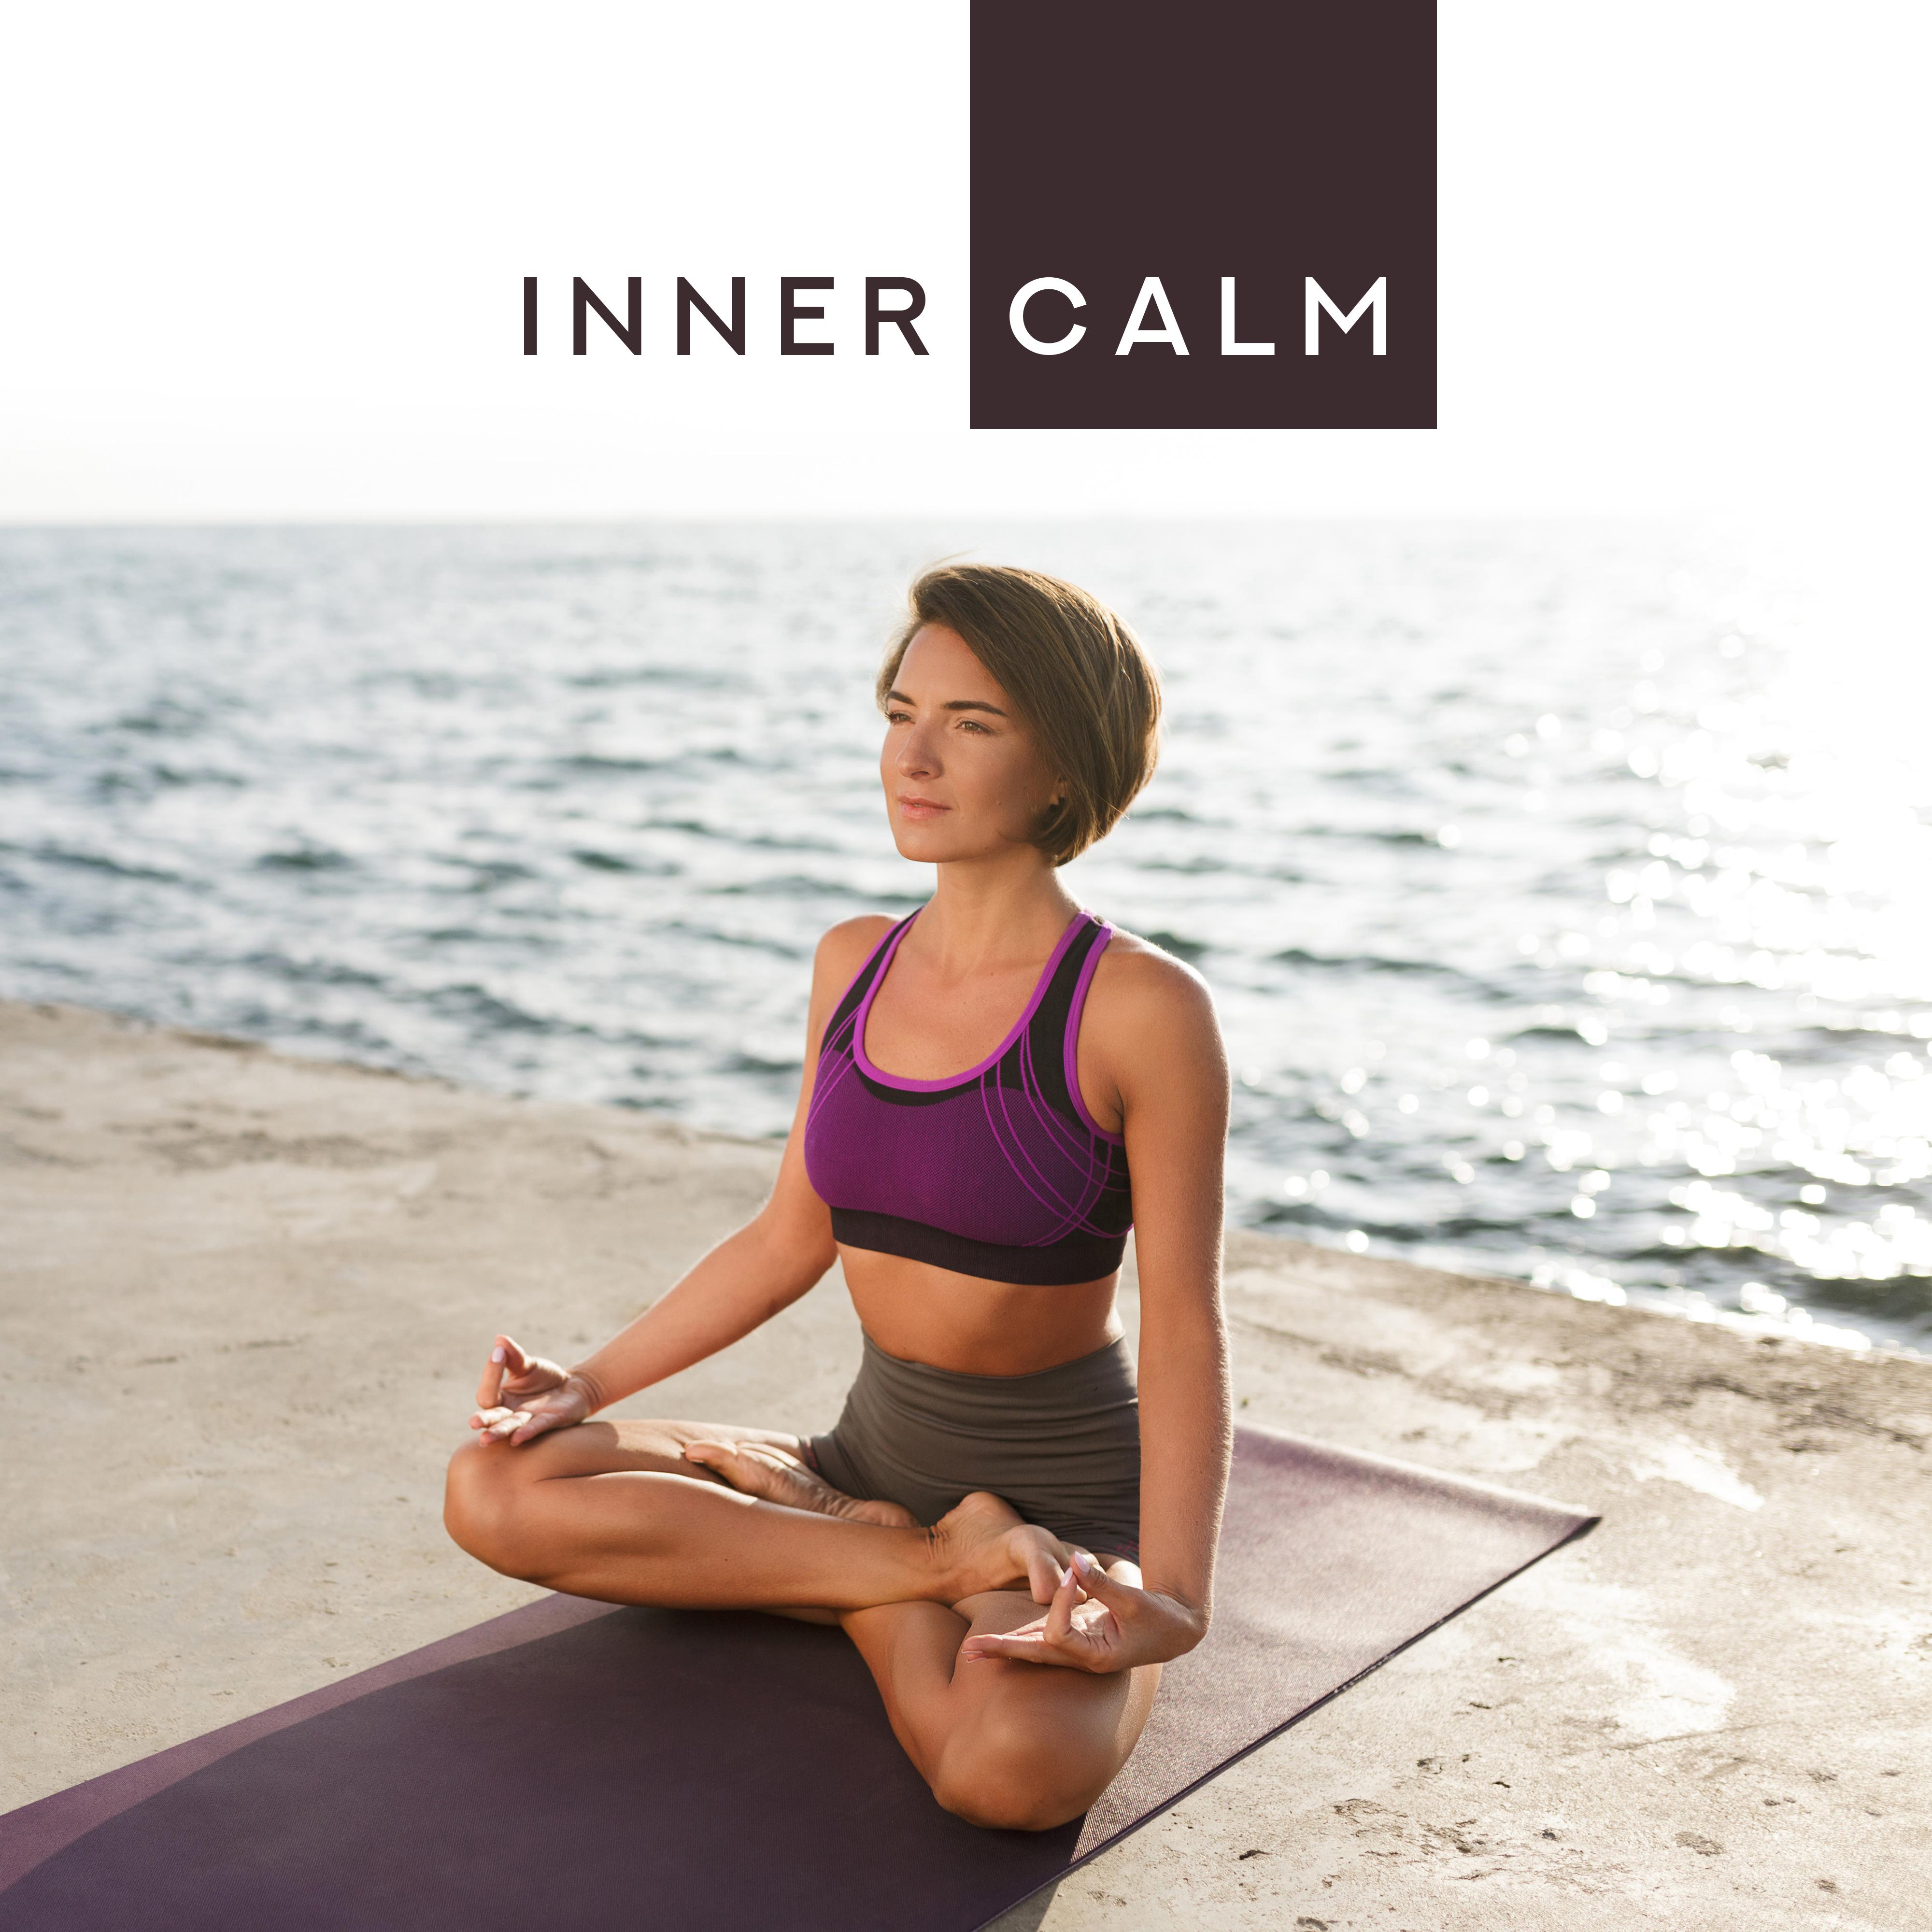 Inner Calm: Music for Meditation and Contemplation, to Restore Inner Freedom from Anxiety, Excitement or Disturbance